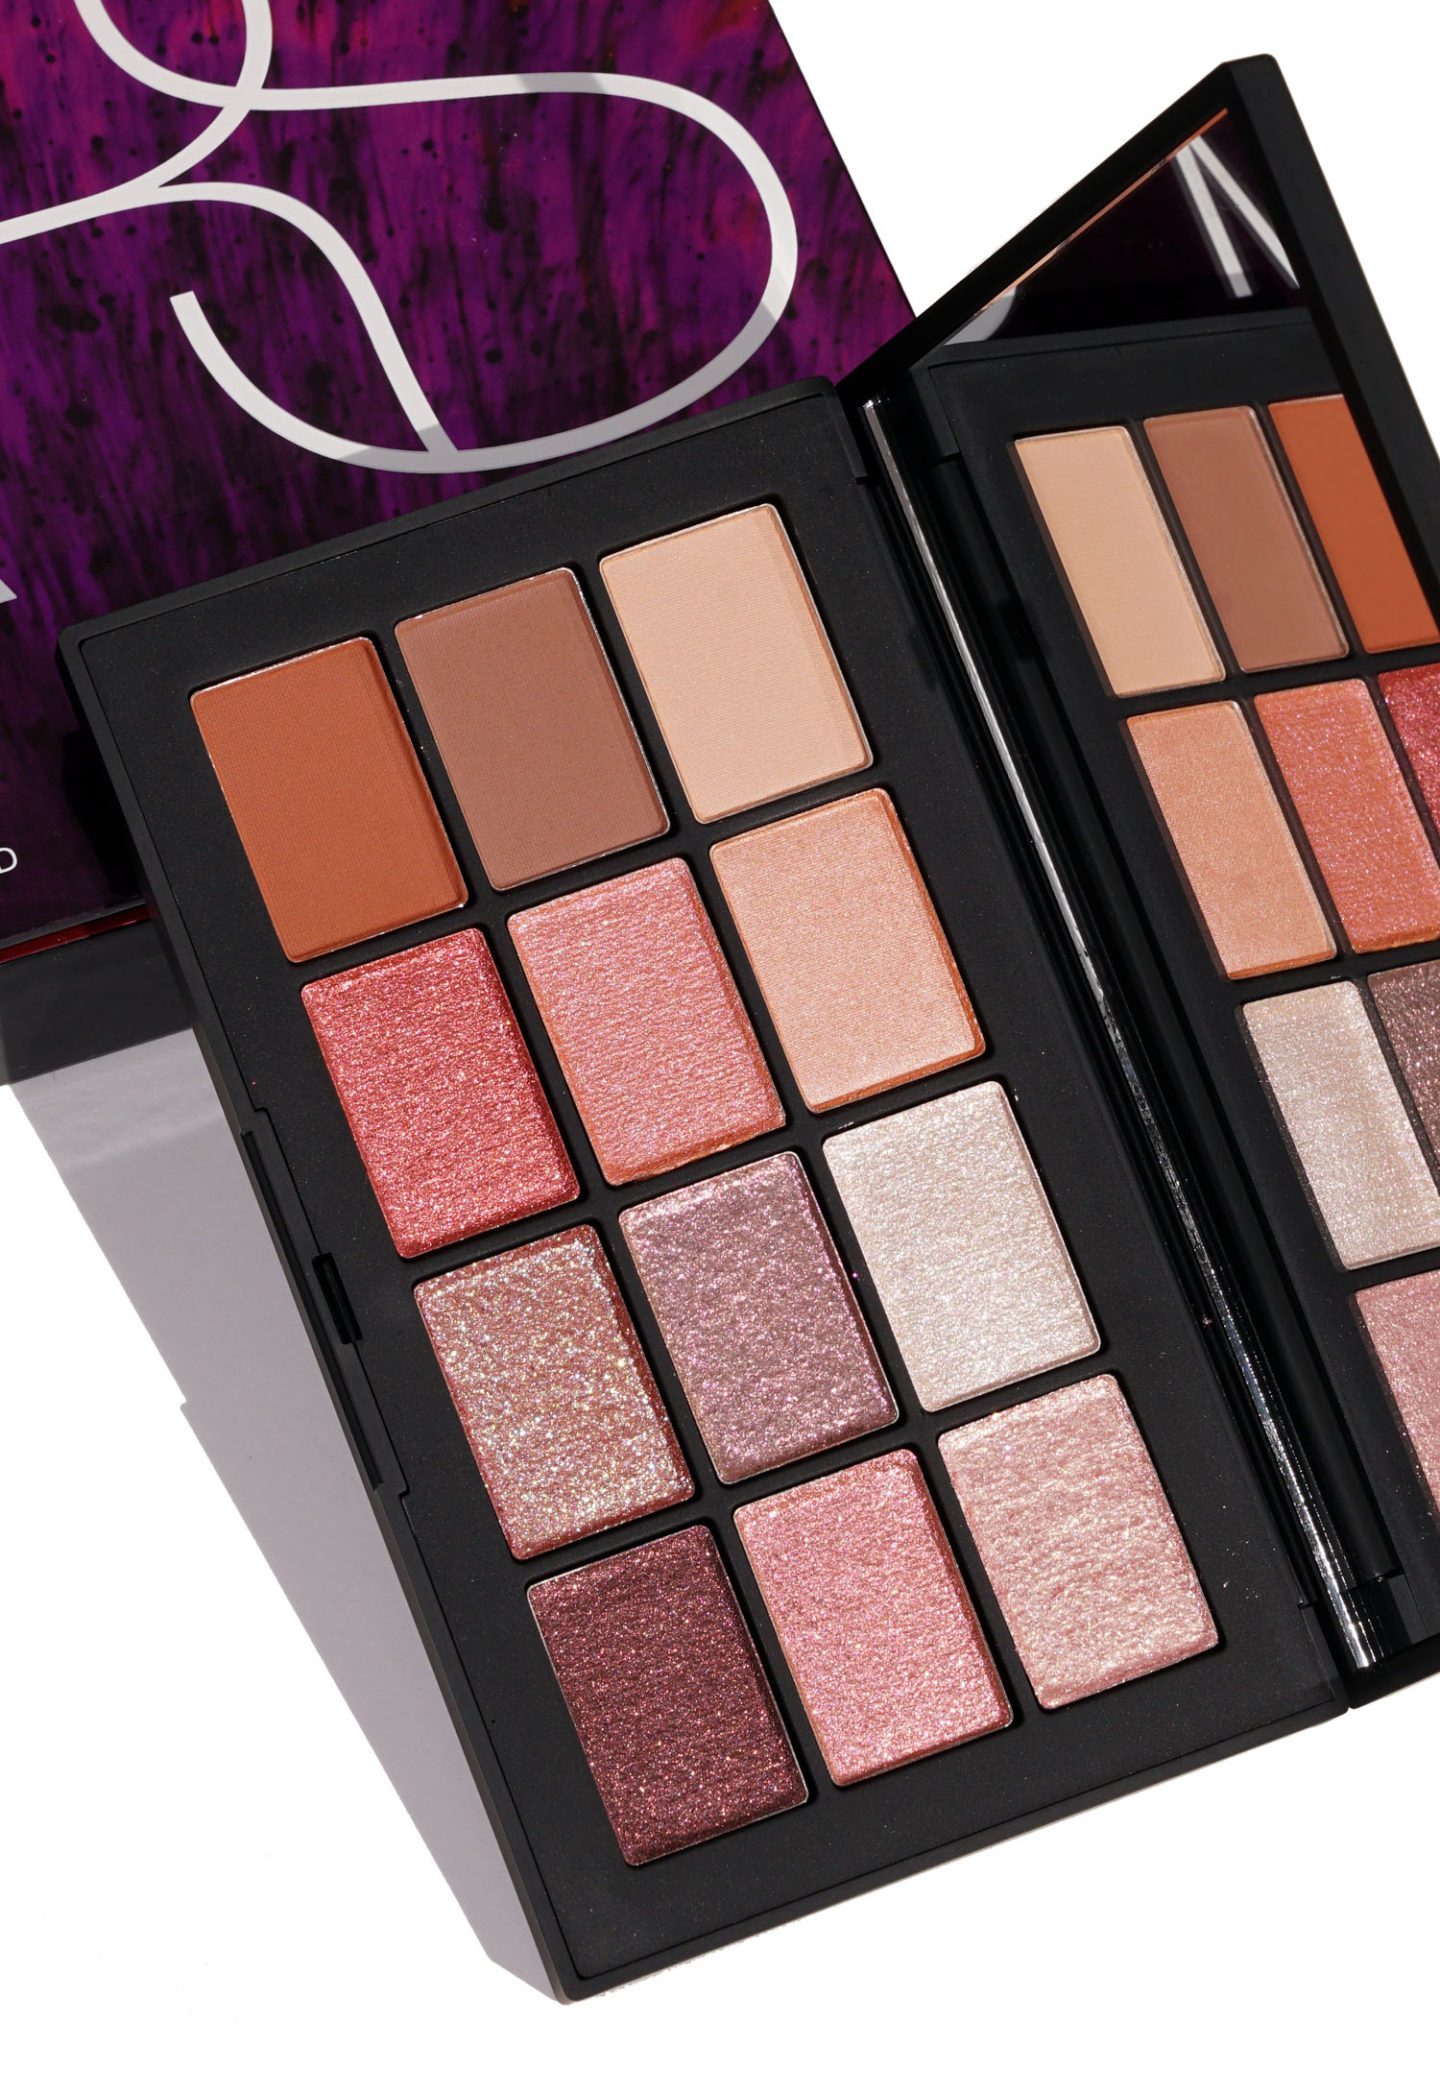 NARS Ignited Eyeshadow Palette review + swatches | The Beauty Look Book